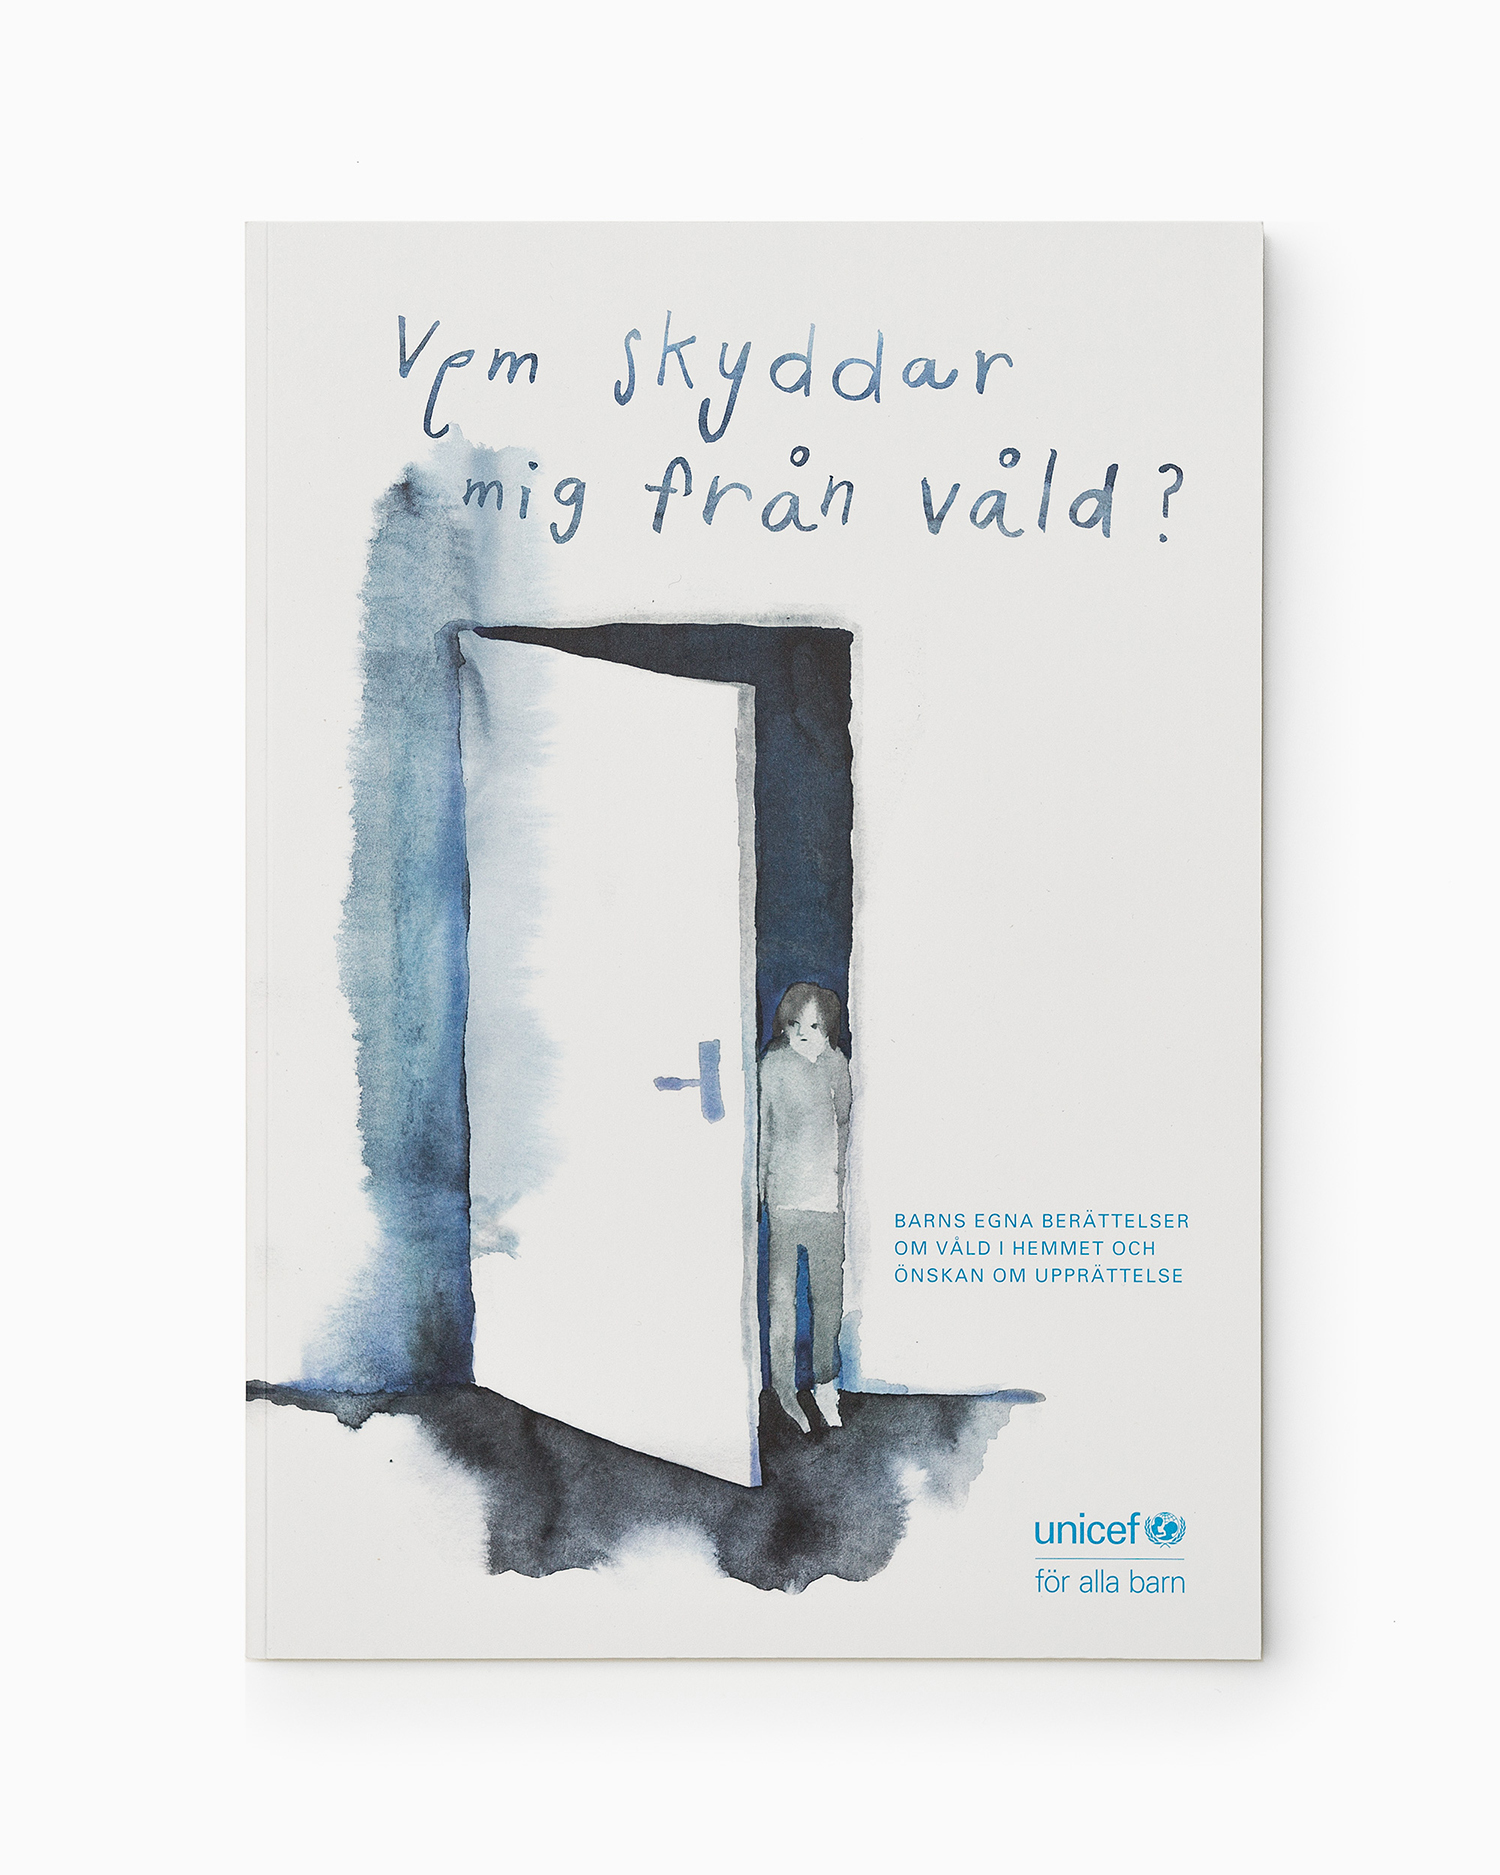 Scandinavian Design – Who Protects Me From Violence? by Bedow, Sweden